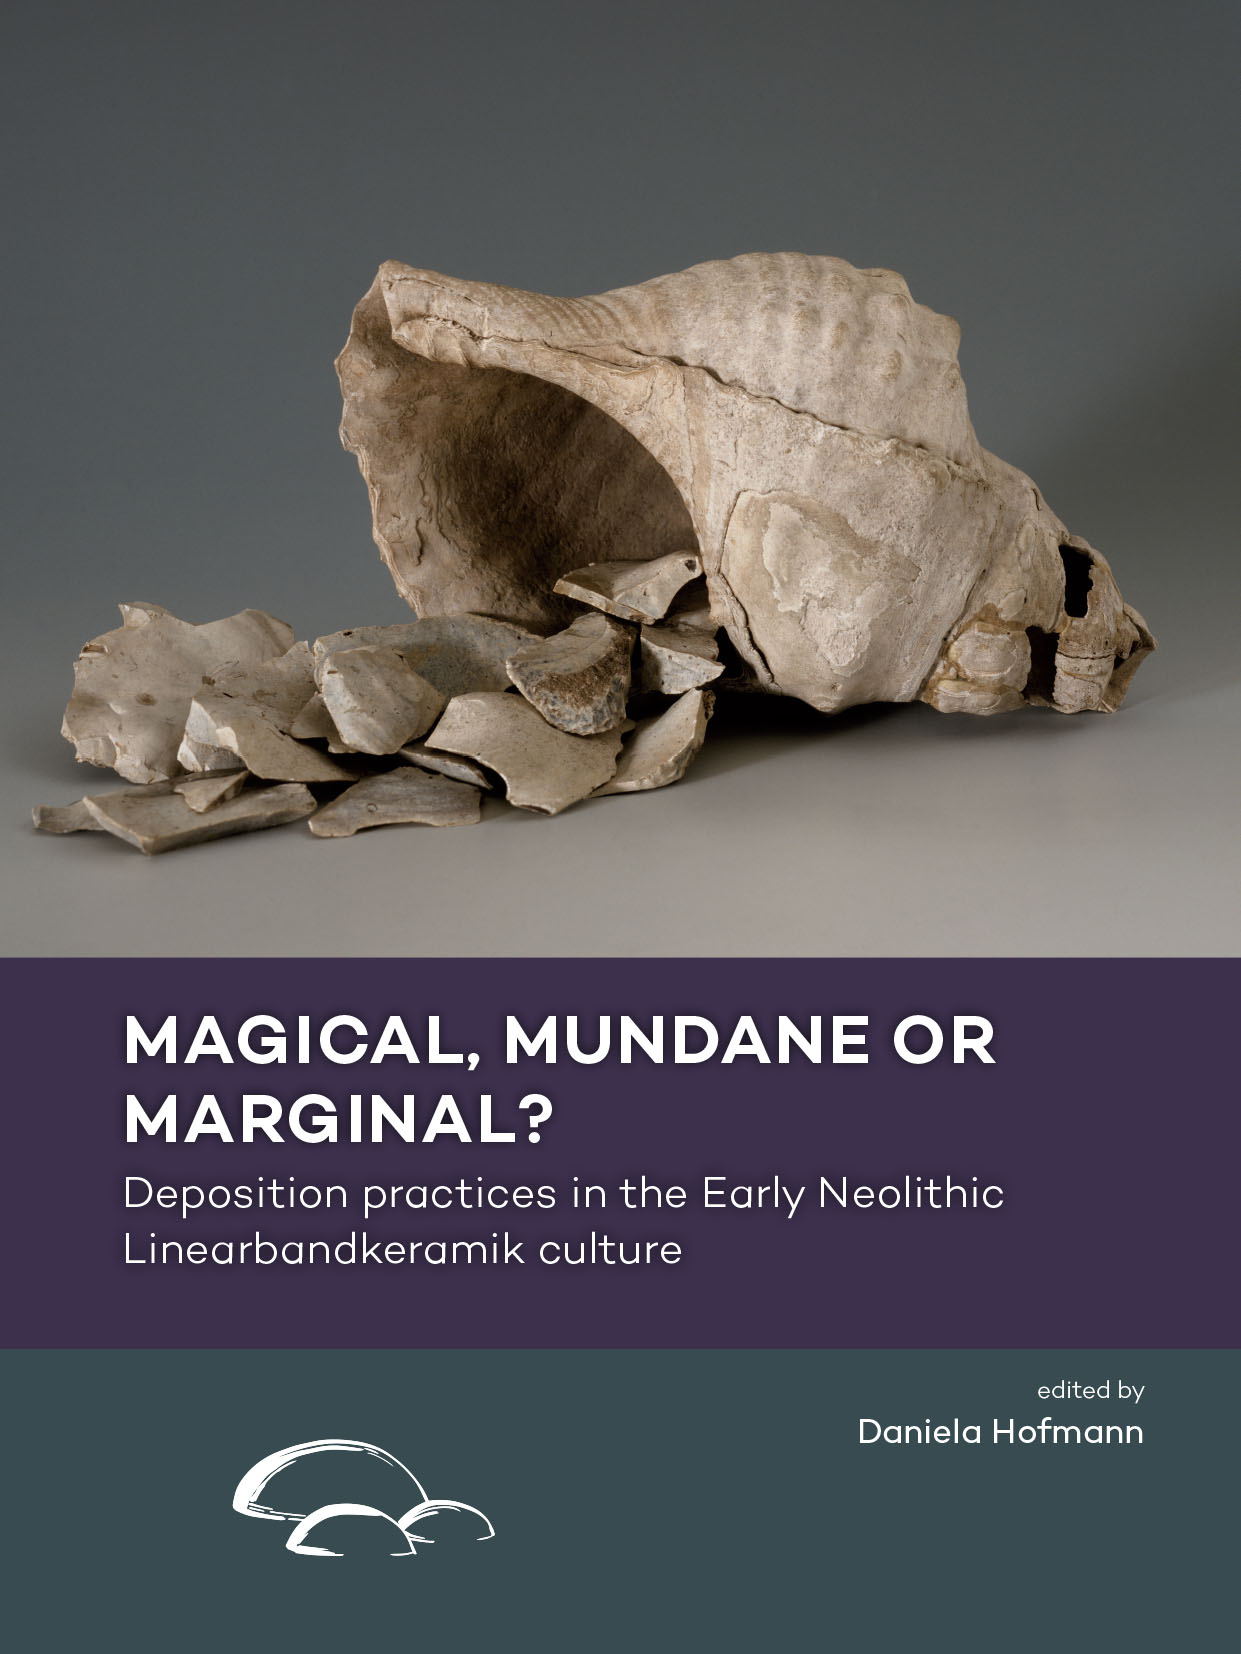 Magical, mundane or marginal ? Deposition practices in the Early Neolithic Linearbandkeramik culture, 2020, 250 p.